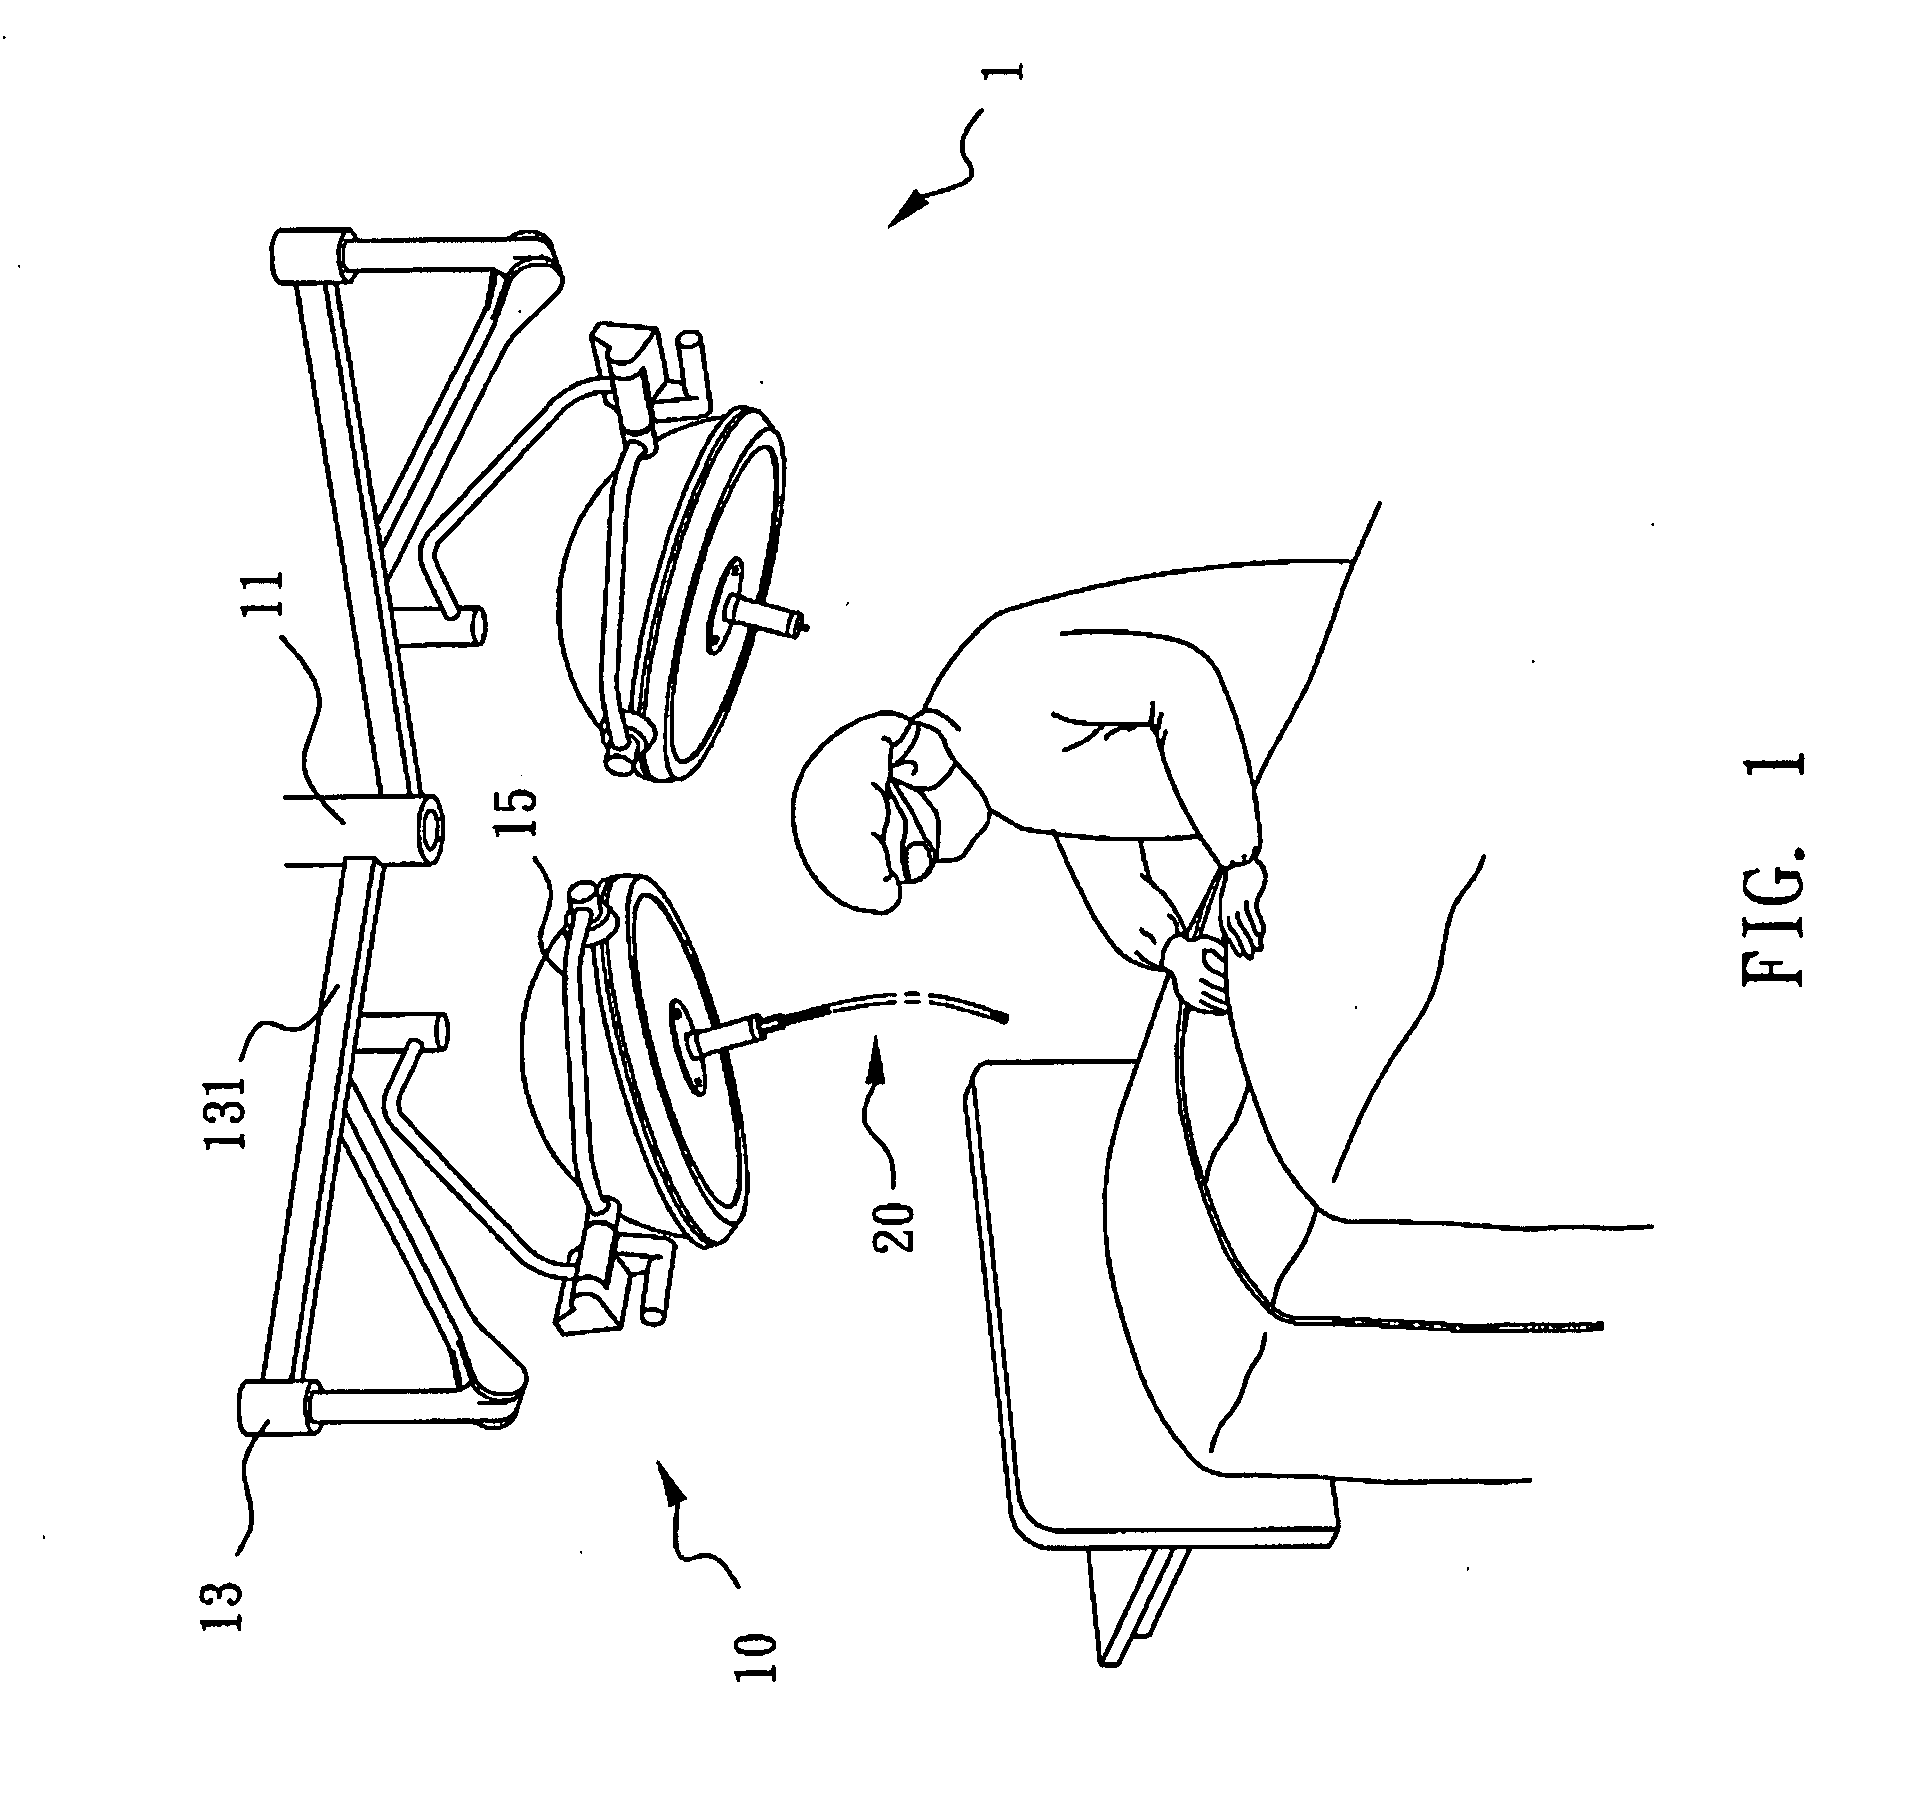 Surgical Lighting System and Surgical Light with Image-Recording Function